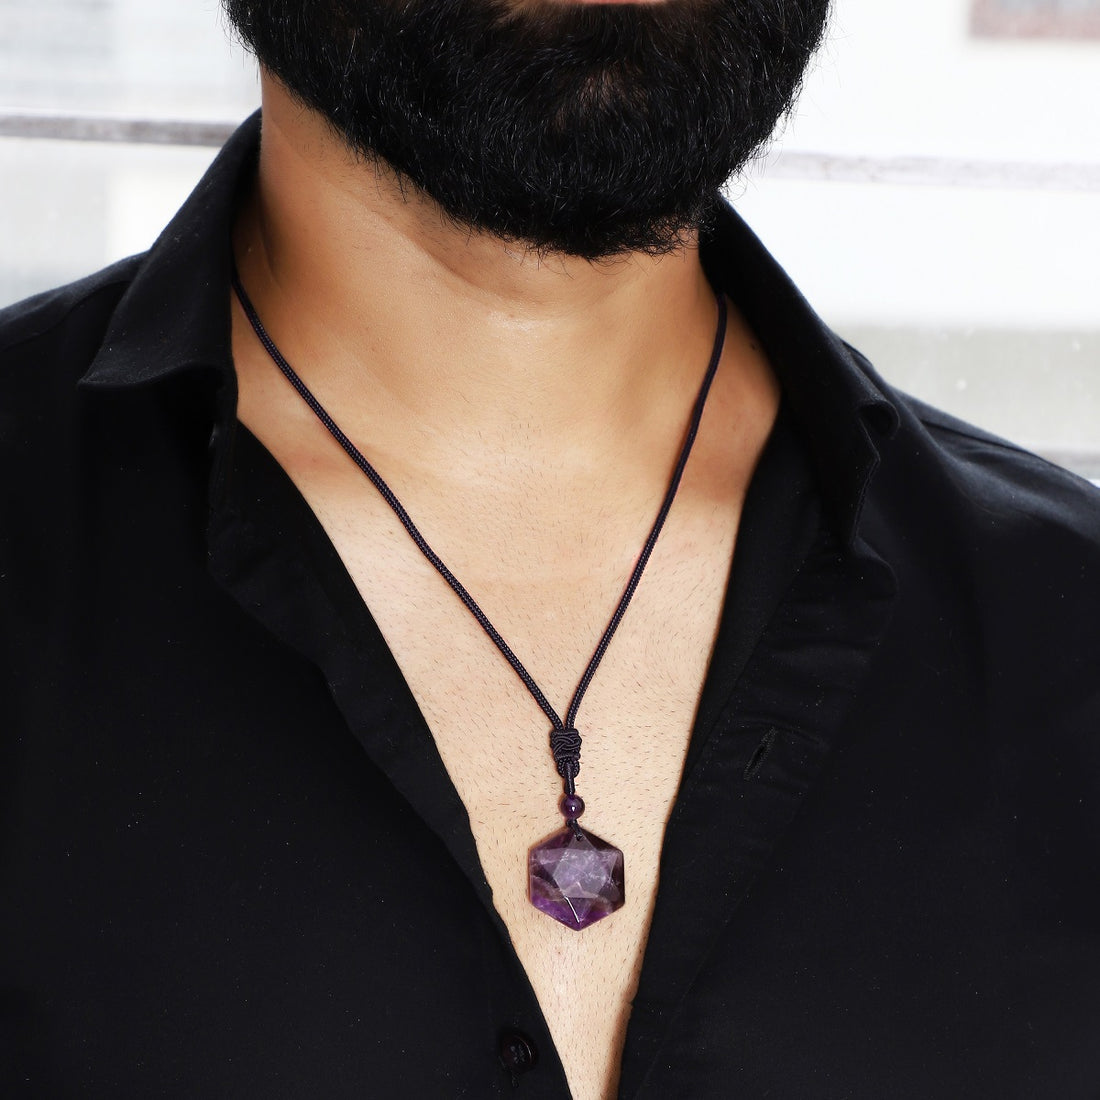  A visual representation of the weight of the pendant necklace, emphasizing its substantial yet comfortable feel on the neckline.